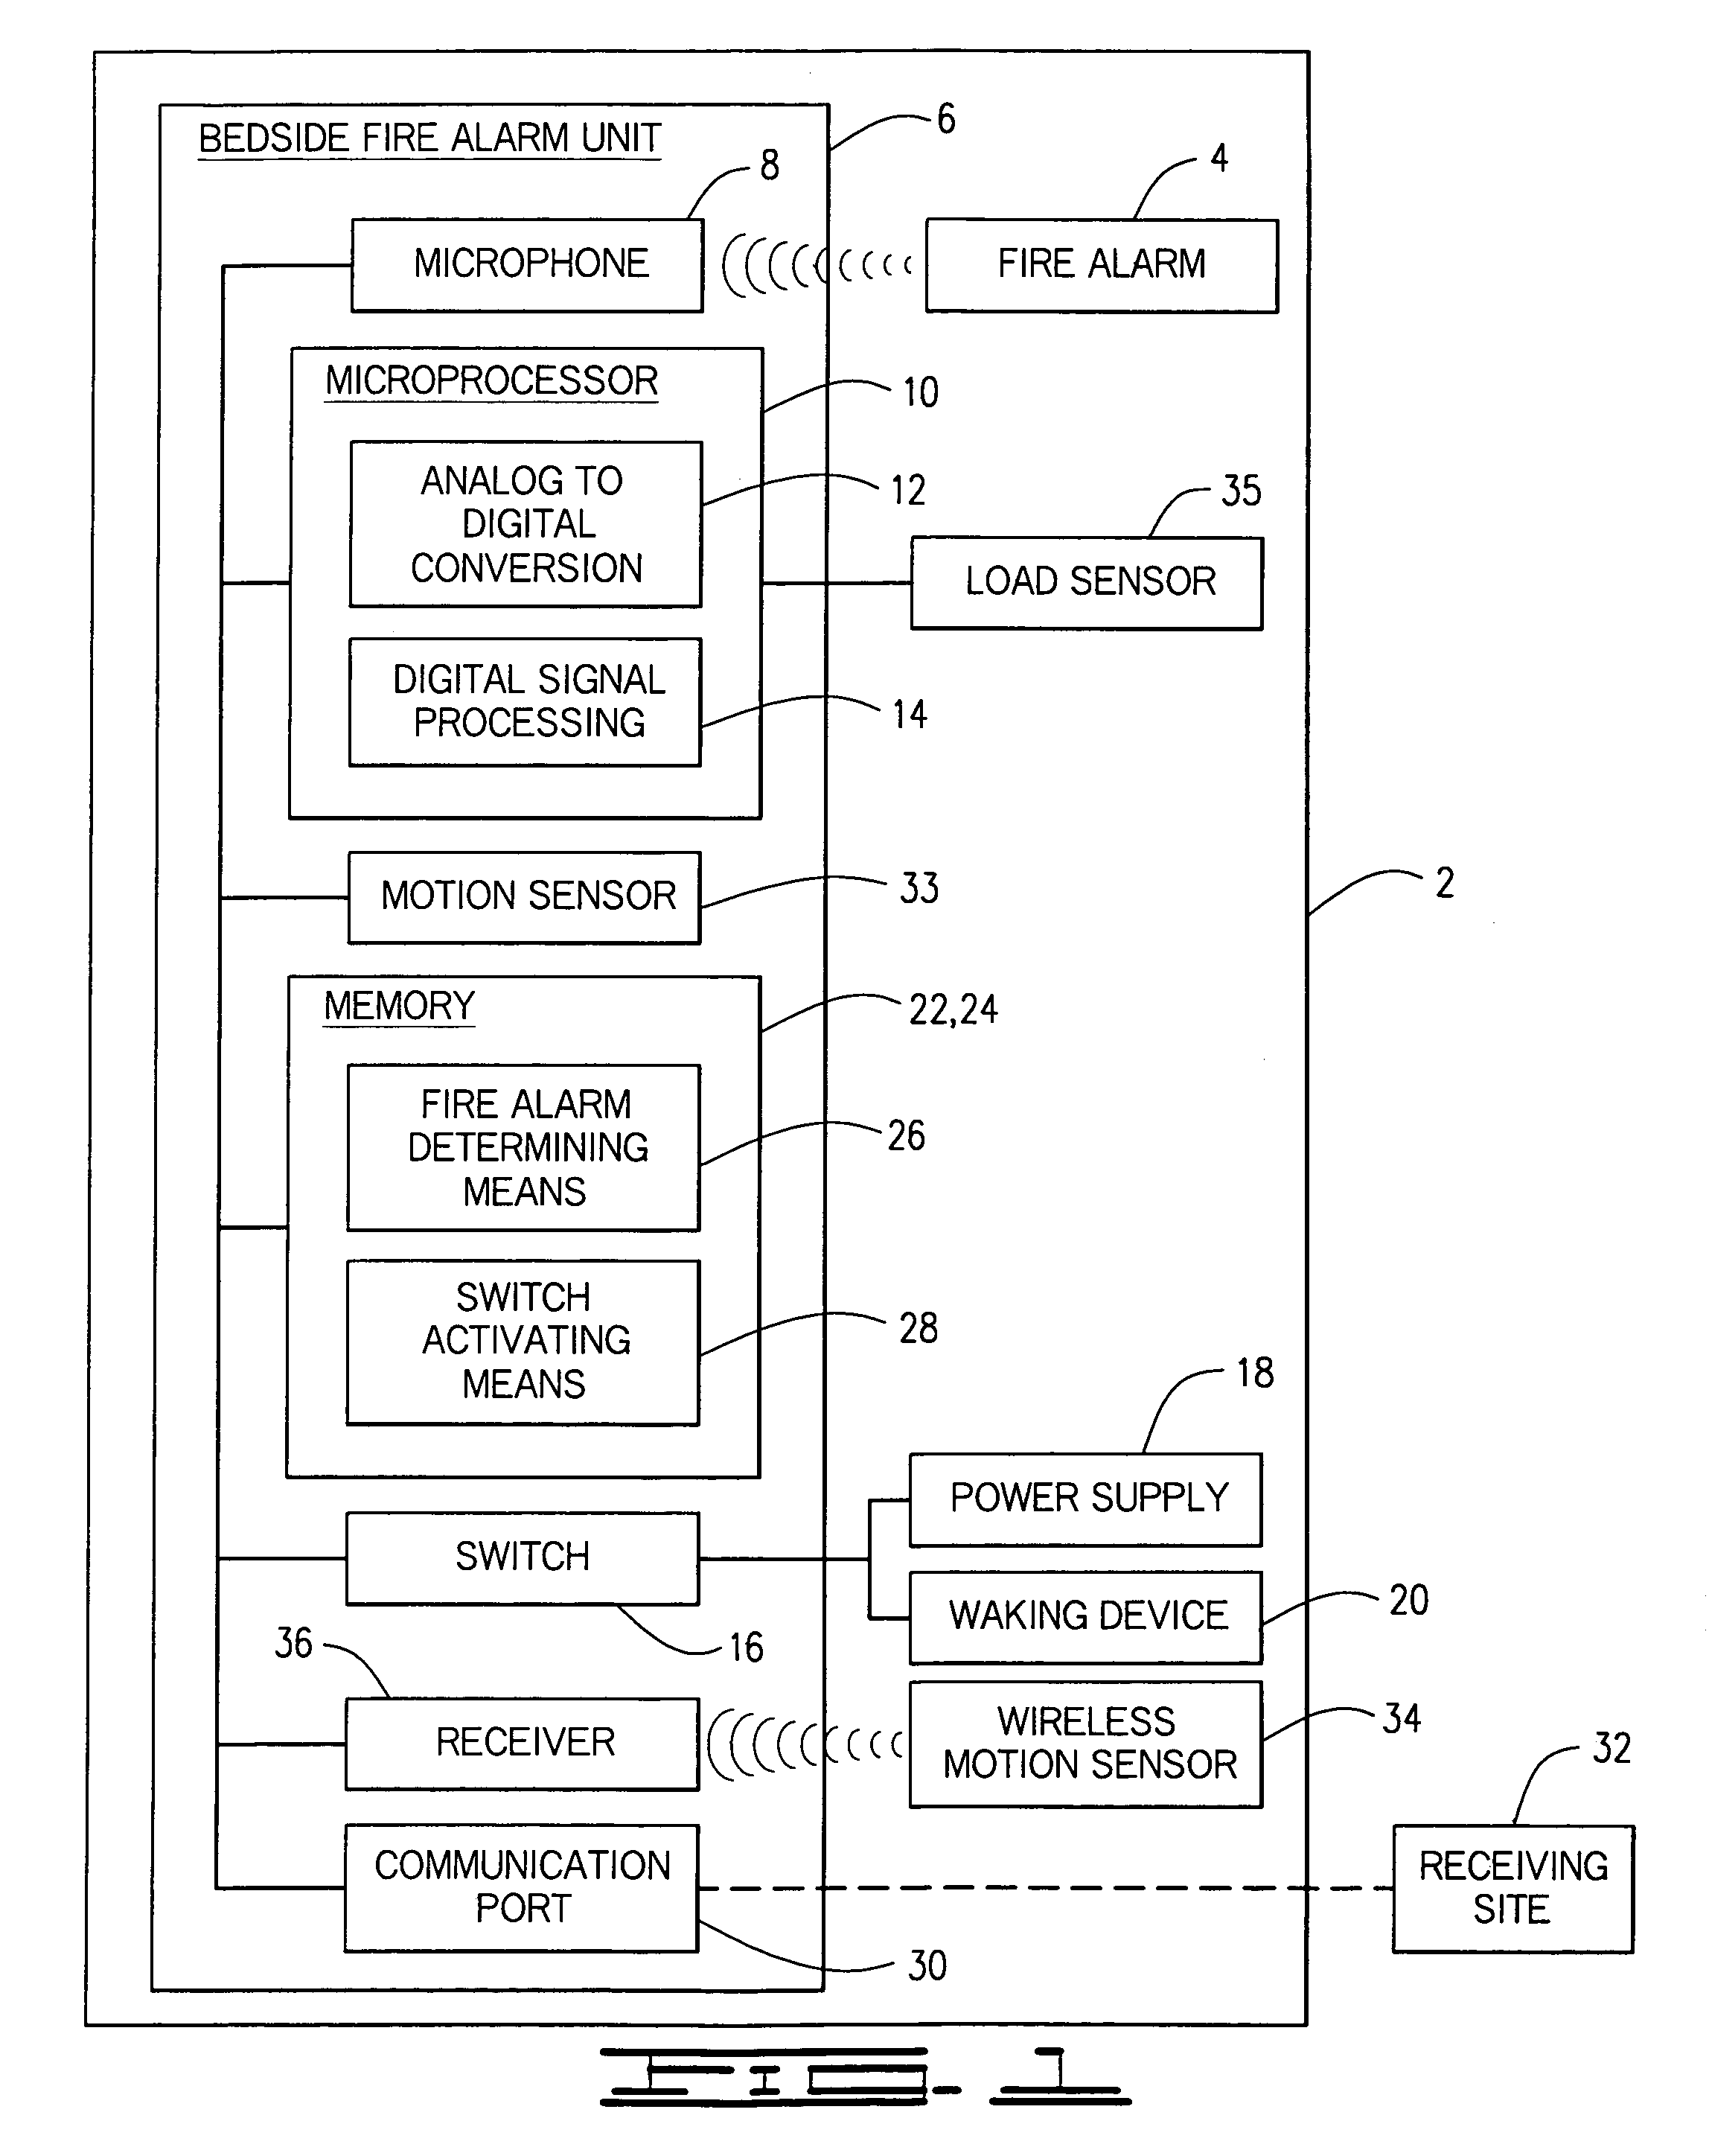 Enhanced fire, safety, security and health monitoring and alarm response method, system and device